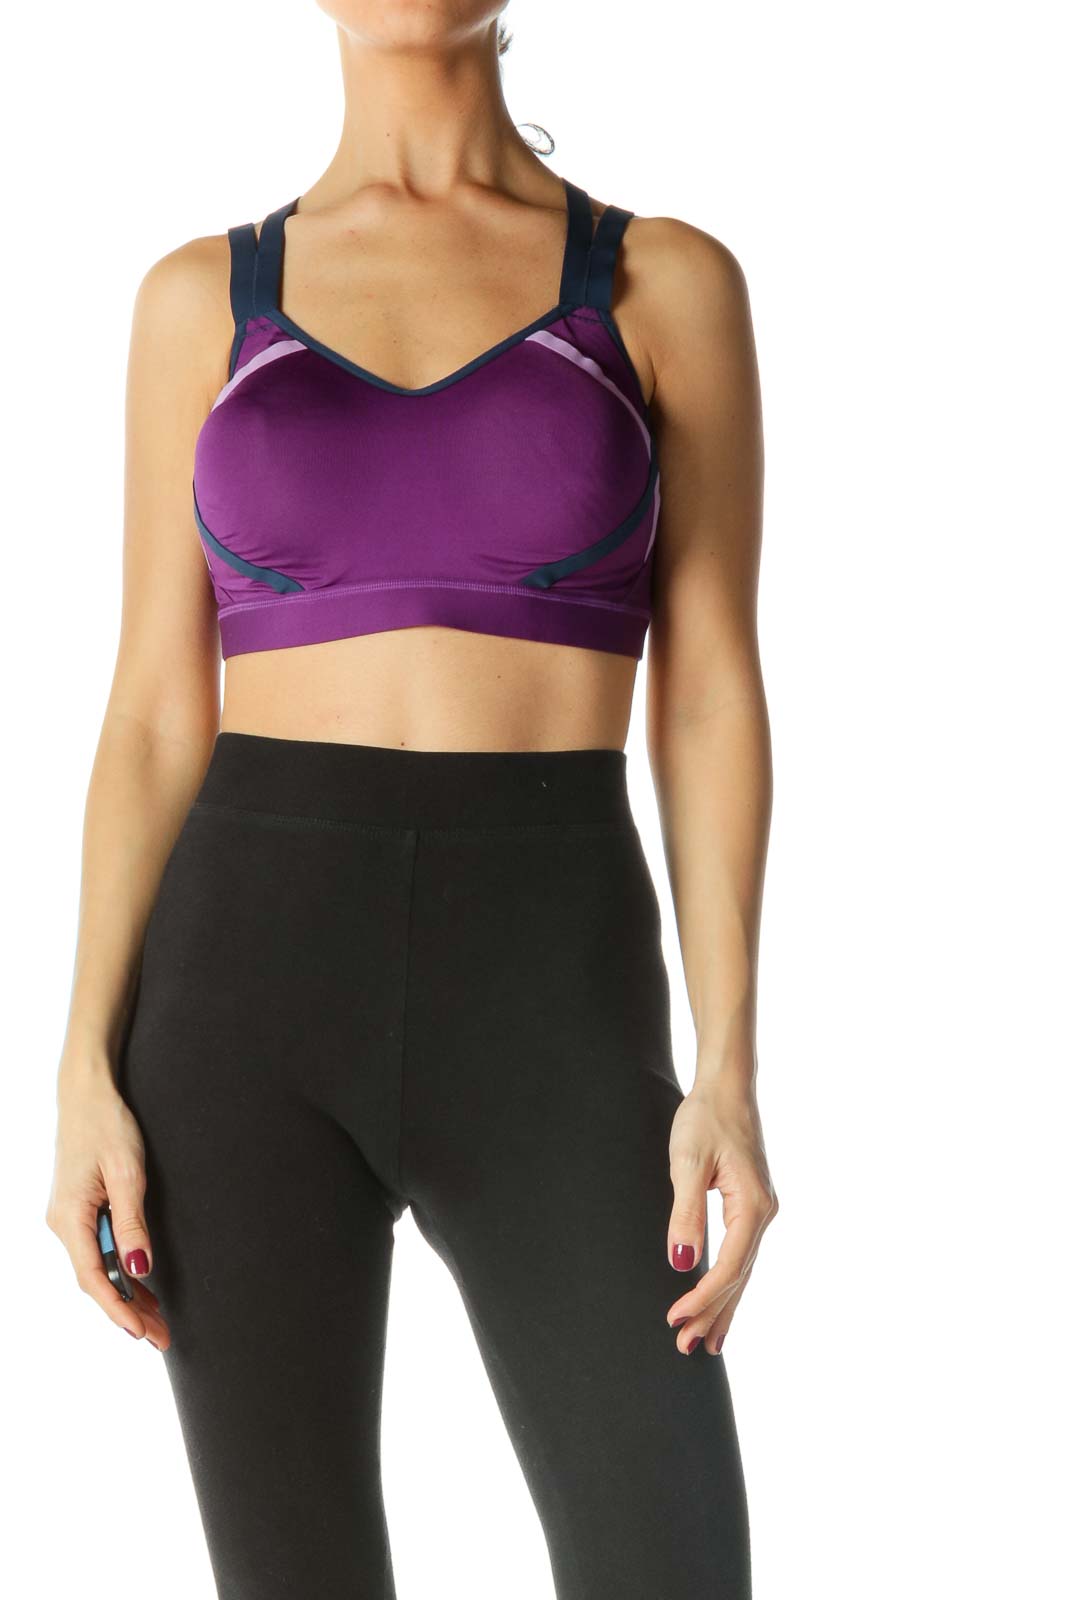 Blue and Purple Strappy Back Sports Bra Front